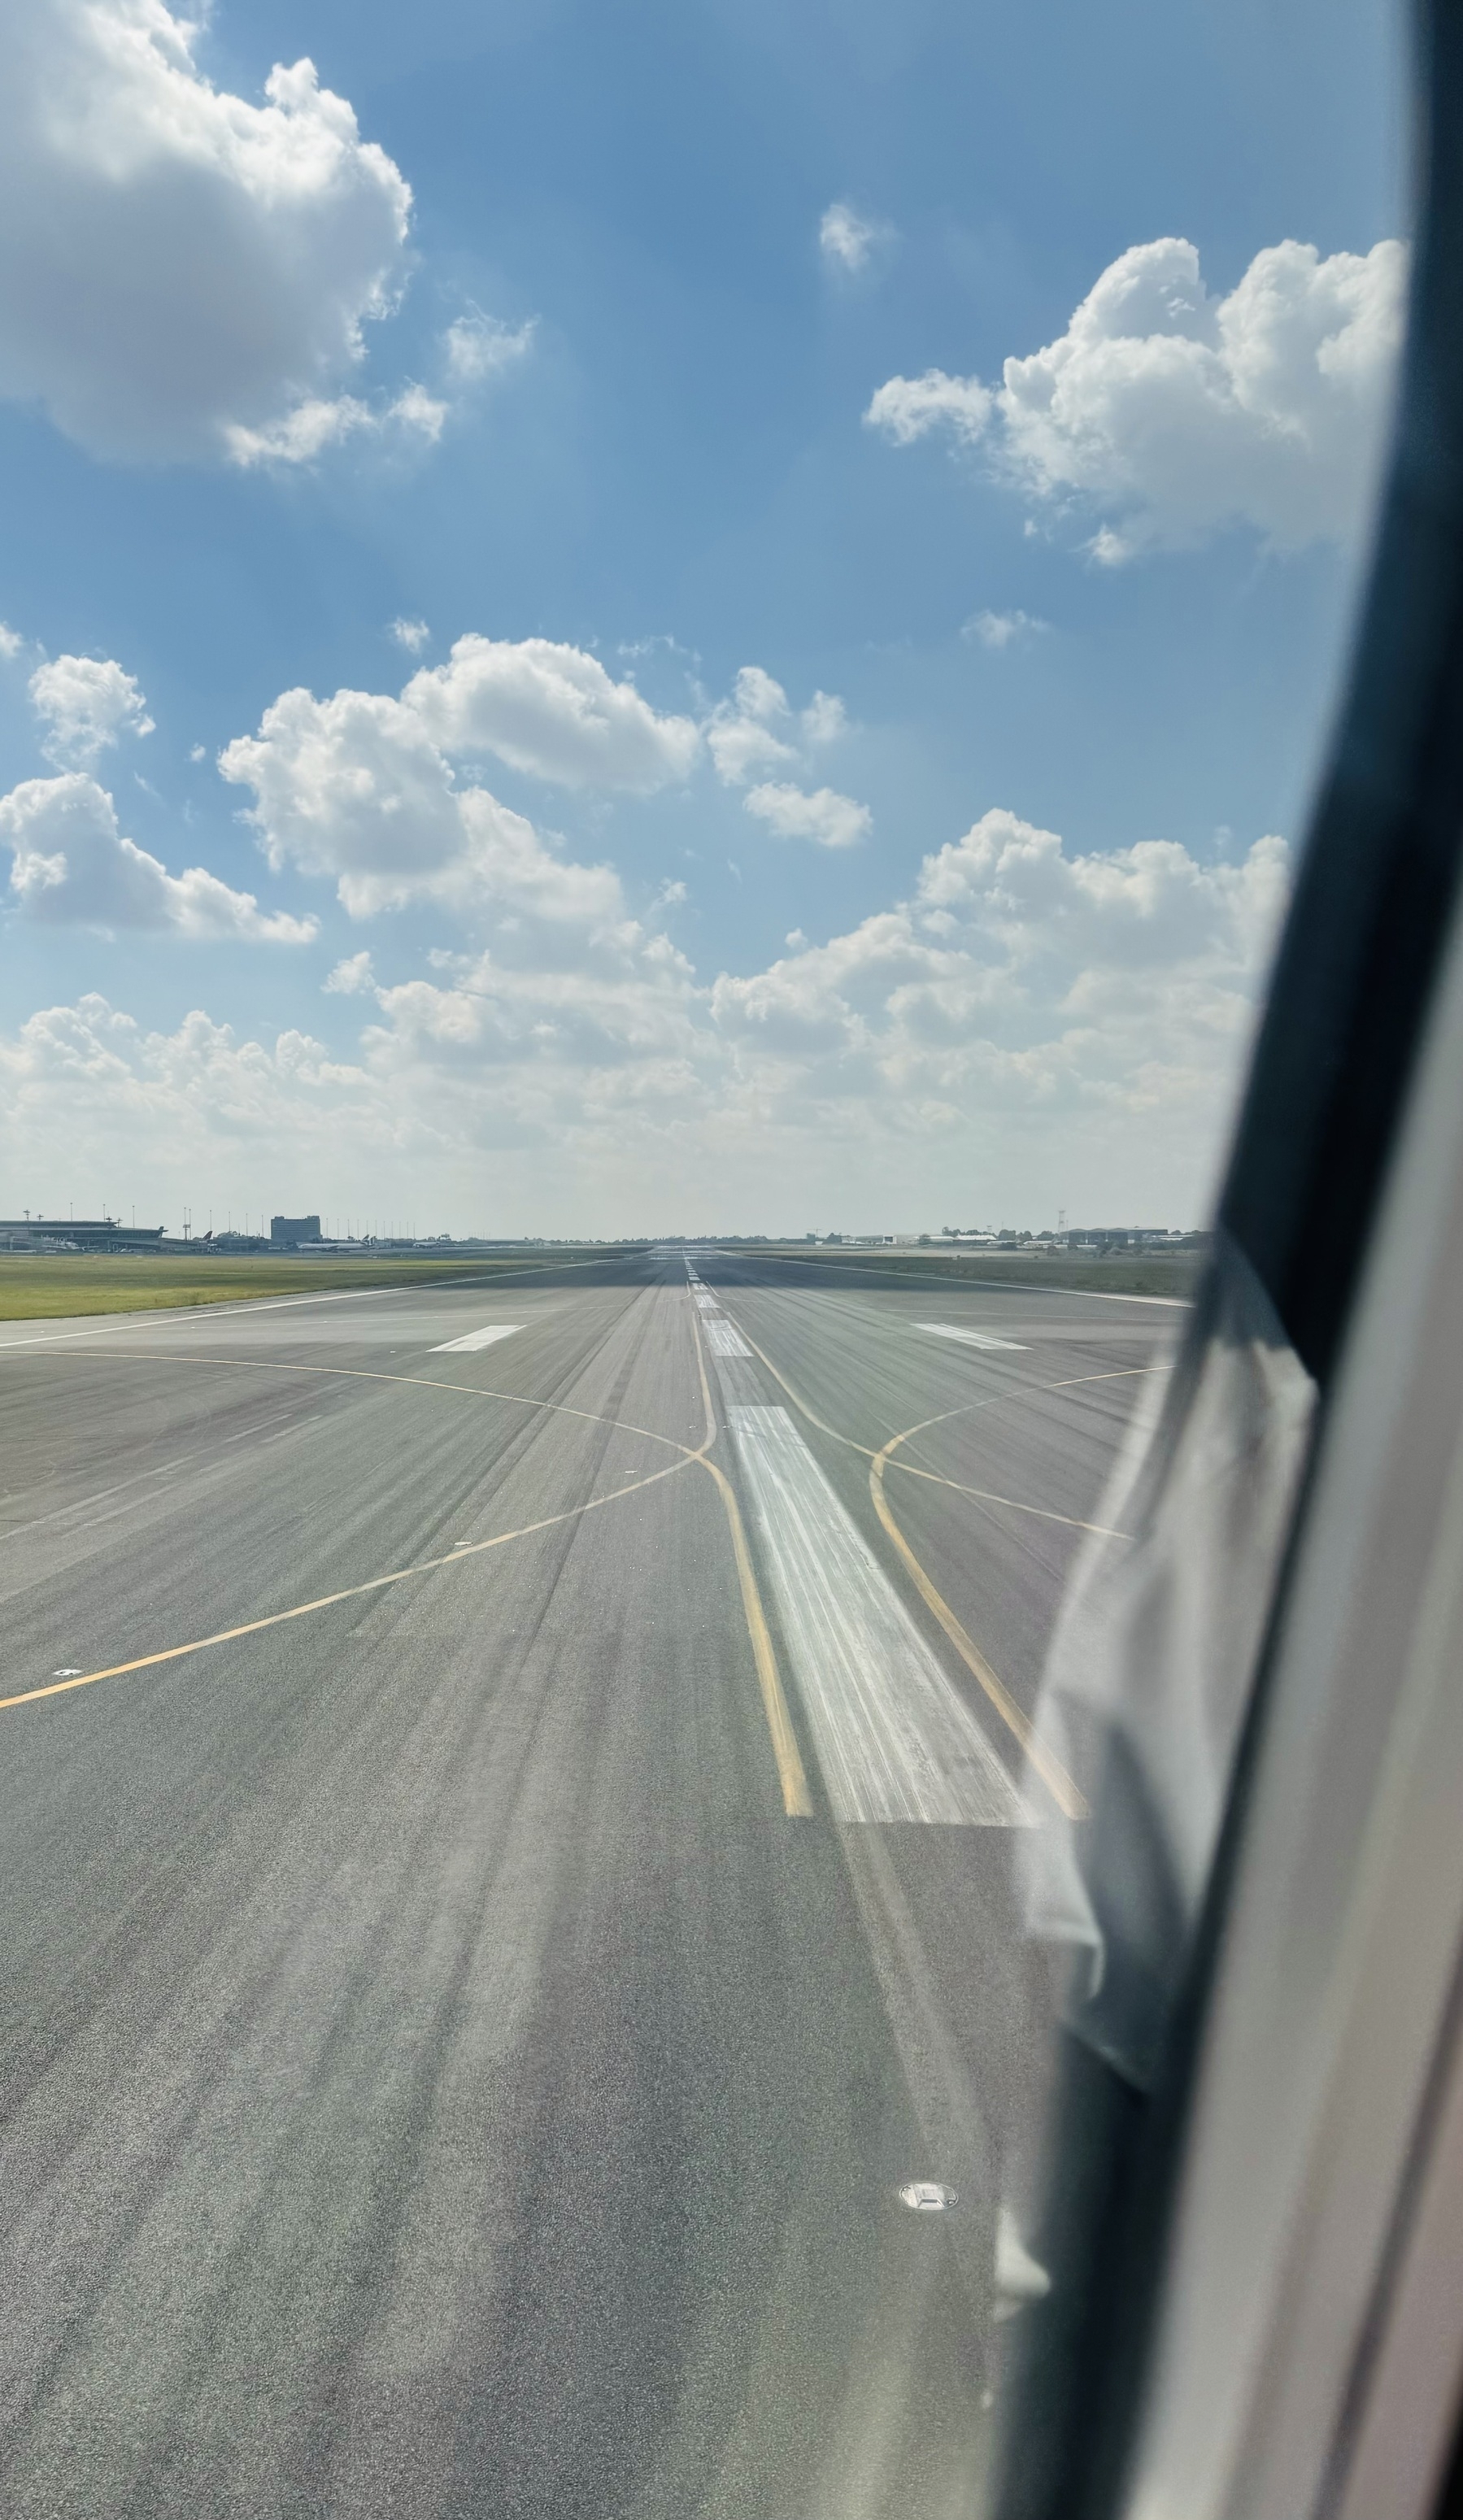 Looking out the window of a plane as it turns on to the runway in Johannesburg to take off. It’s sunny, with white clouds in a blue sky.